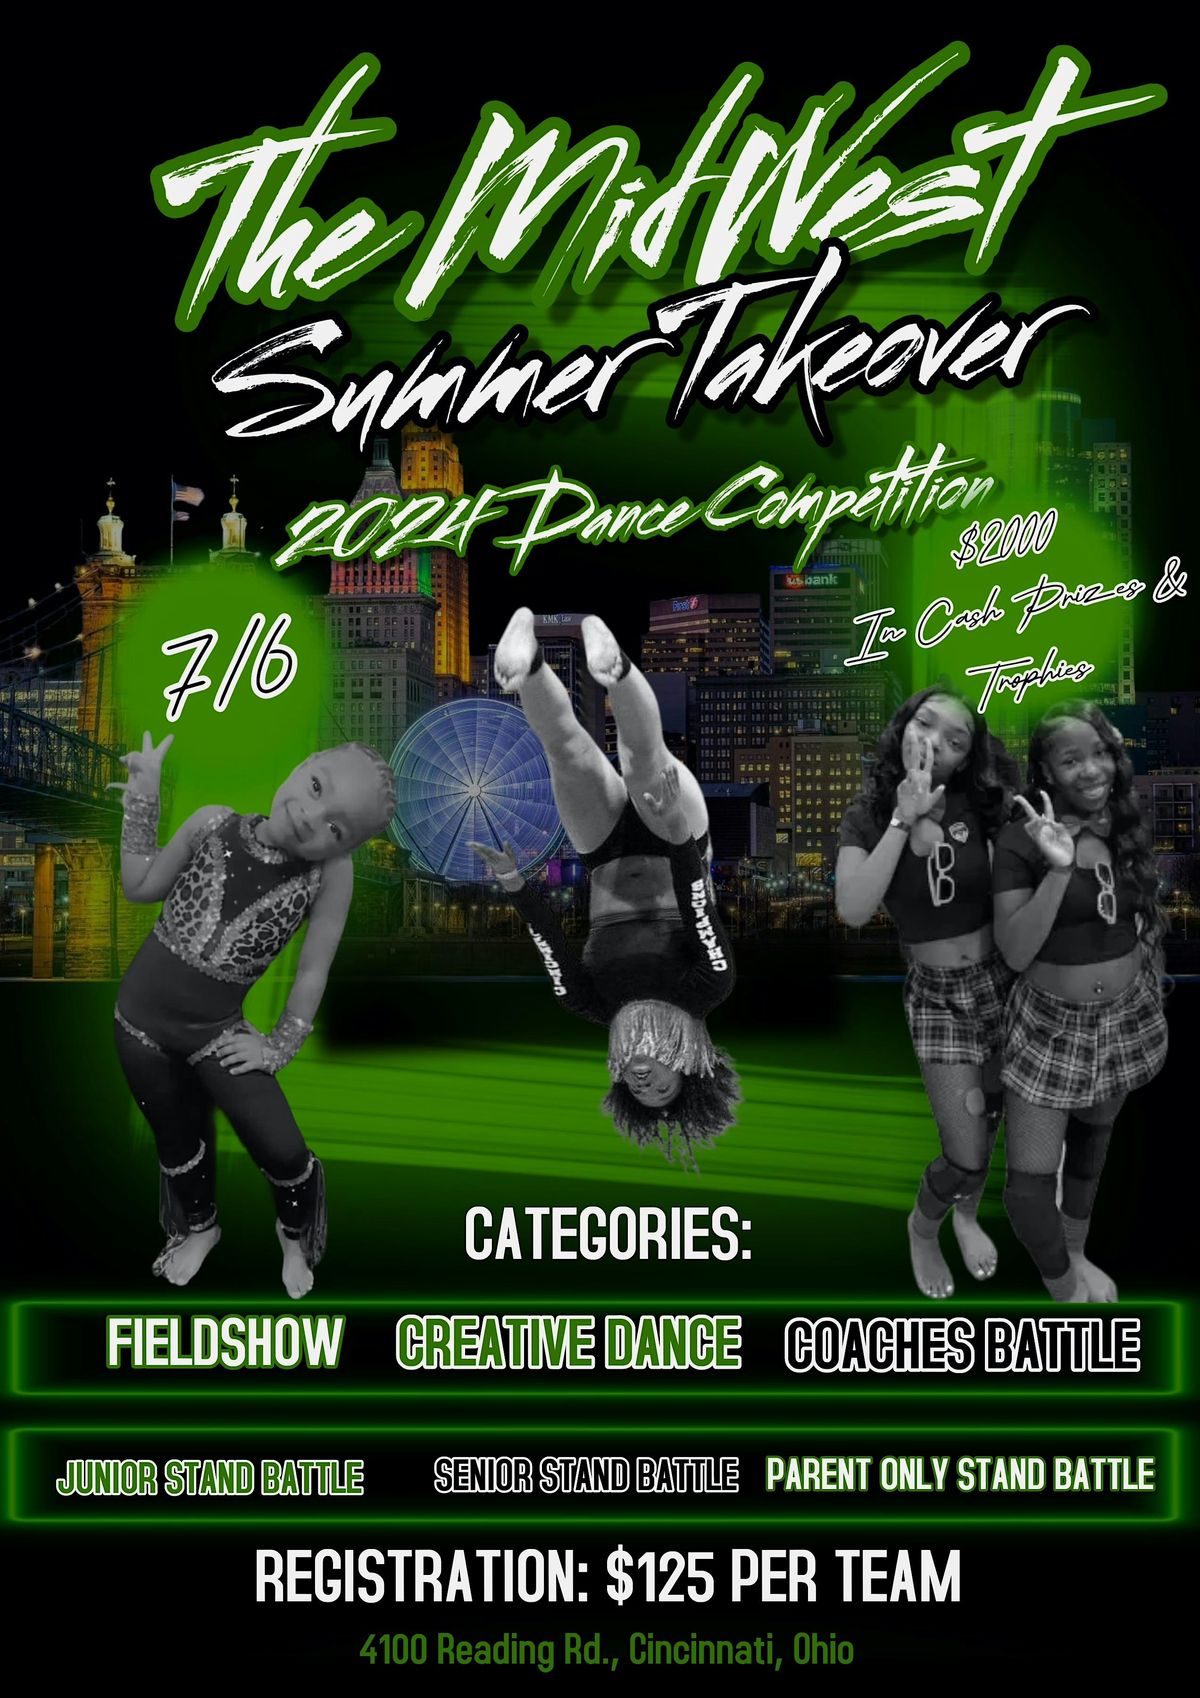 The Midwest Summer Takeover